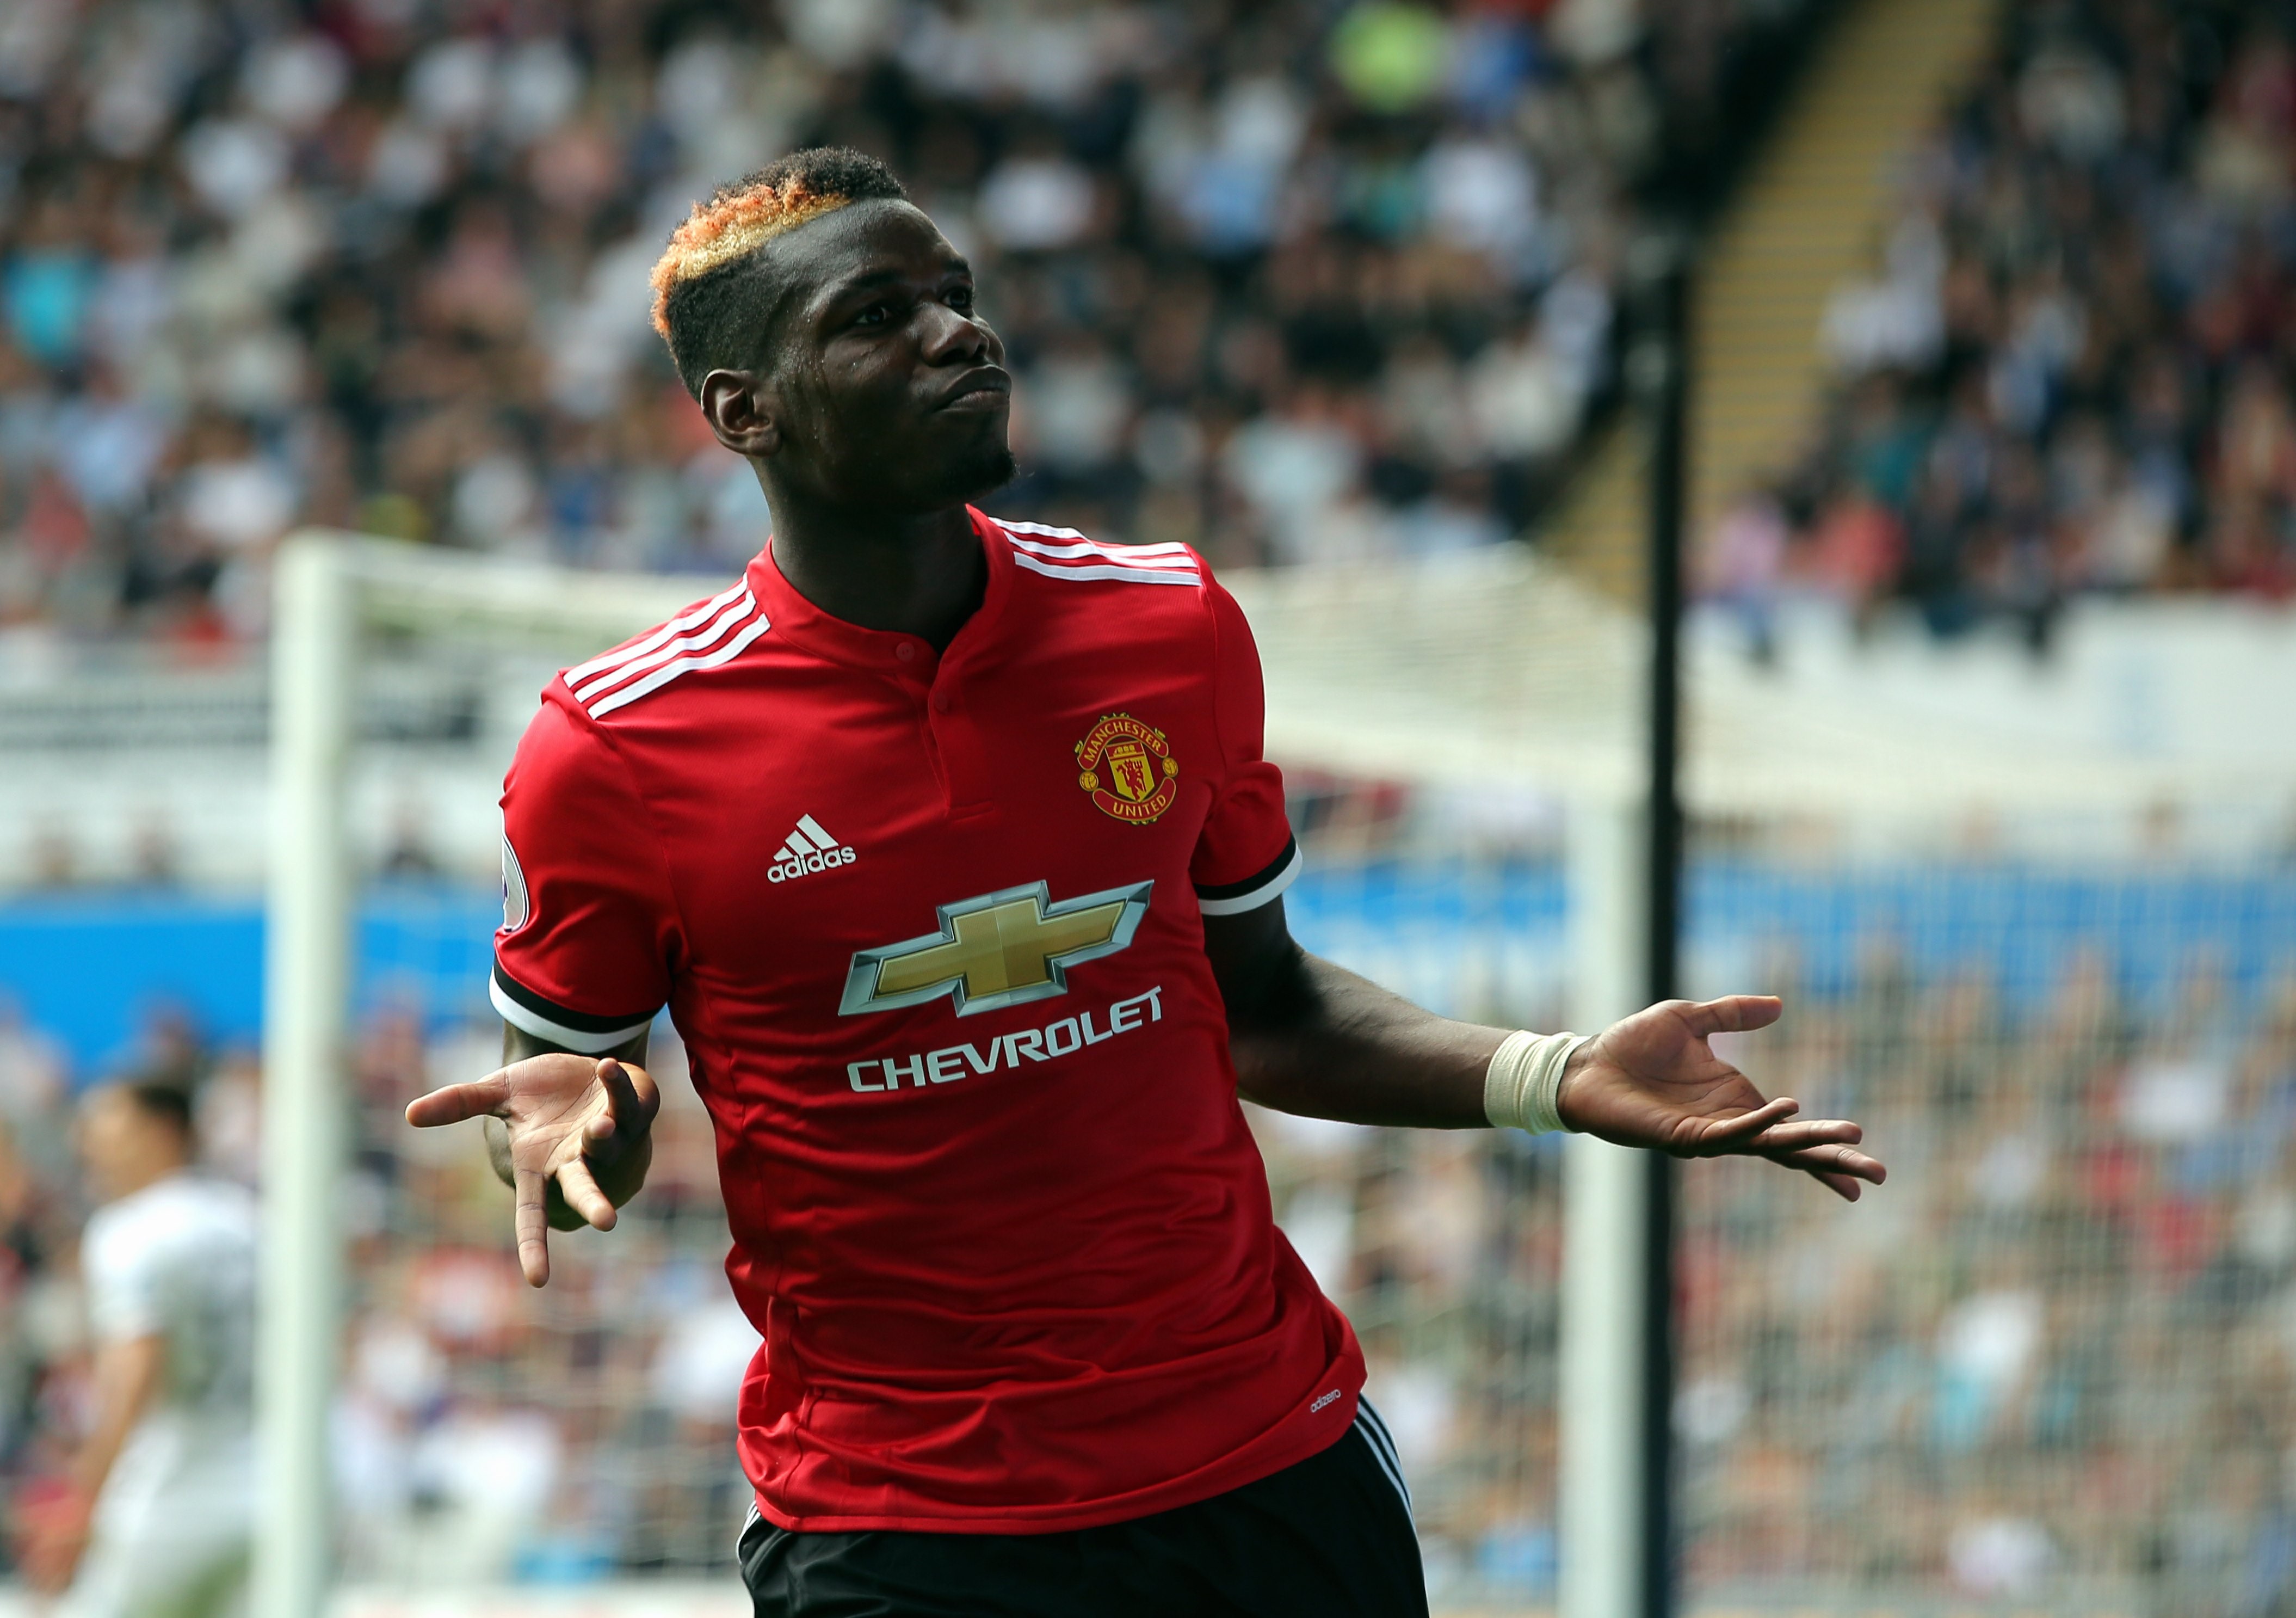 Paul Pogba has scored two goals in two league games for Manchester United this season. Photo: EPA